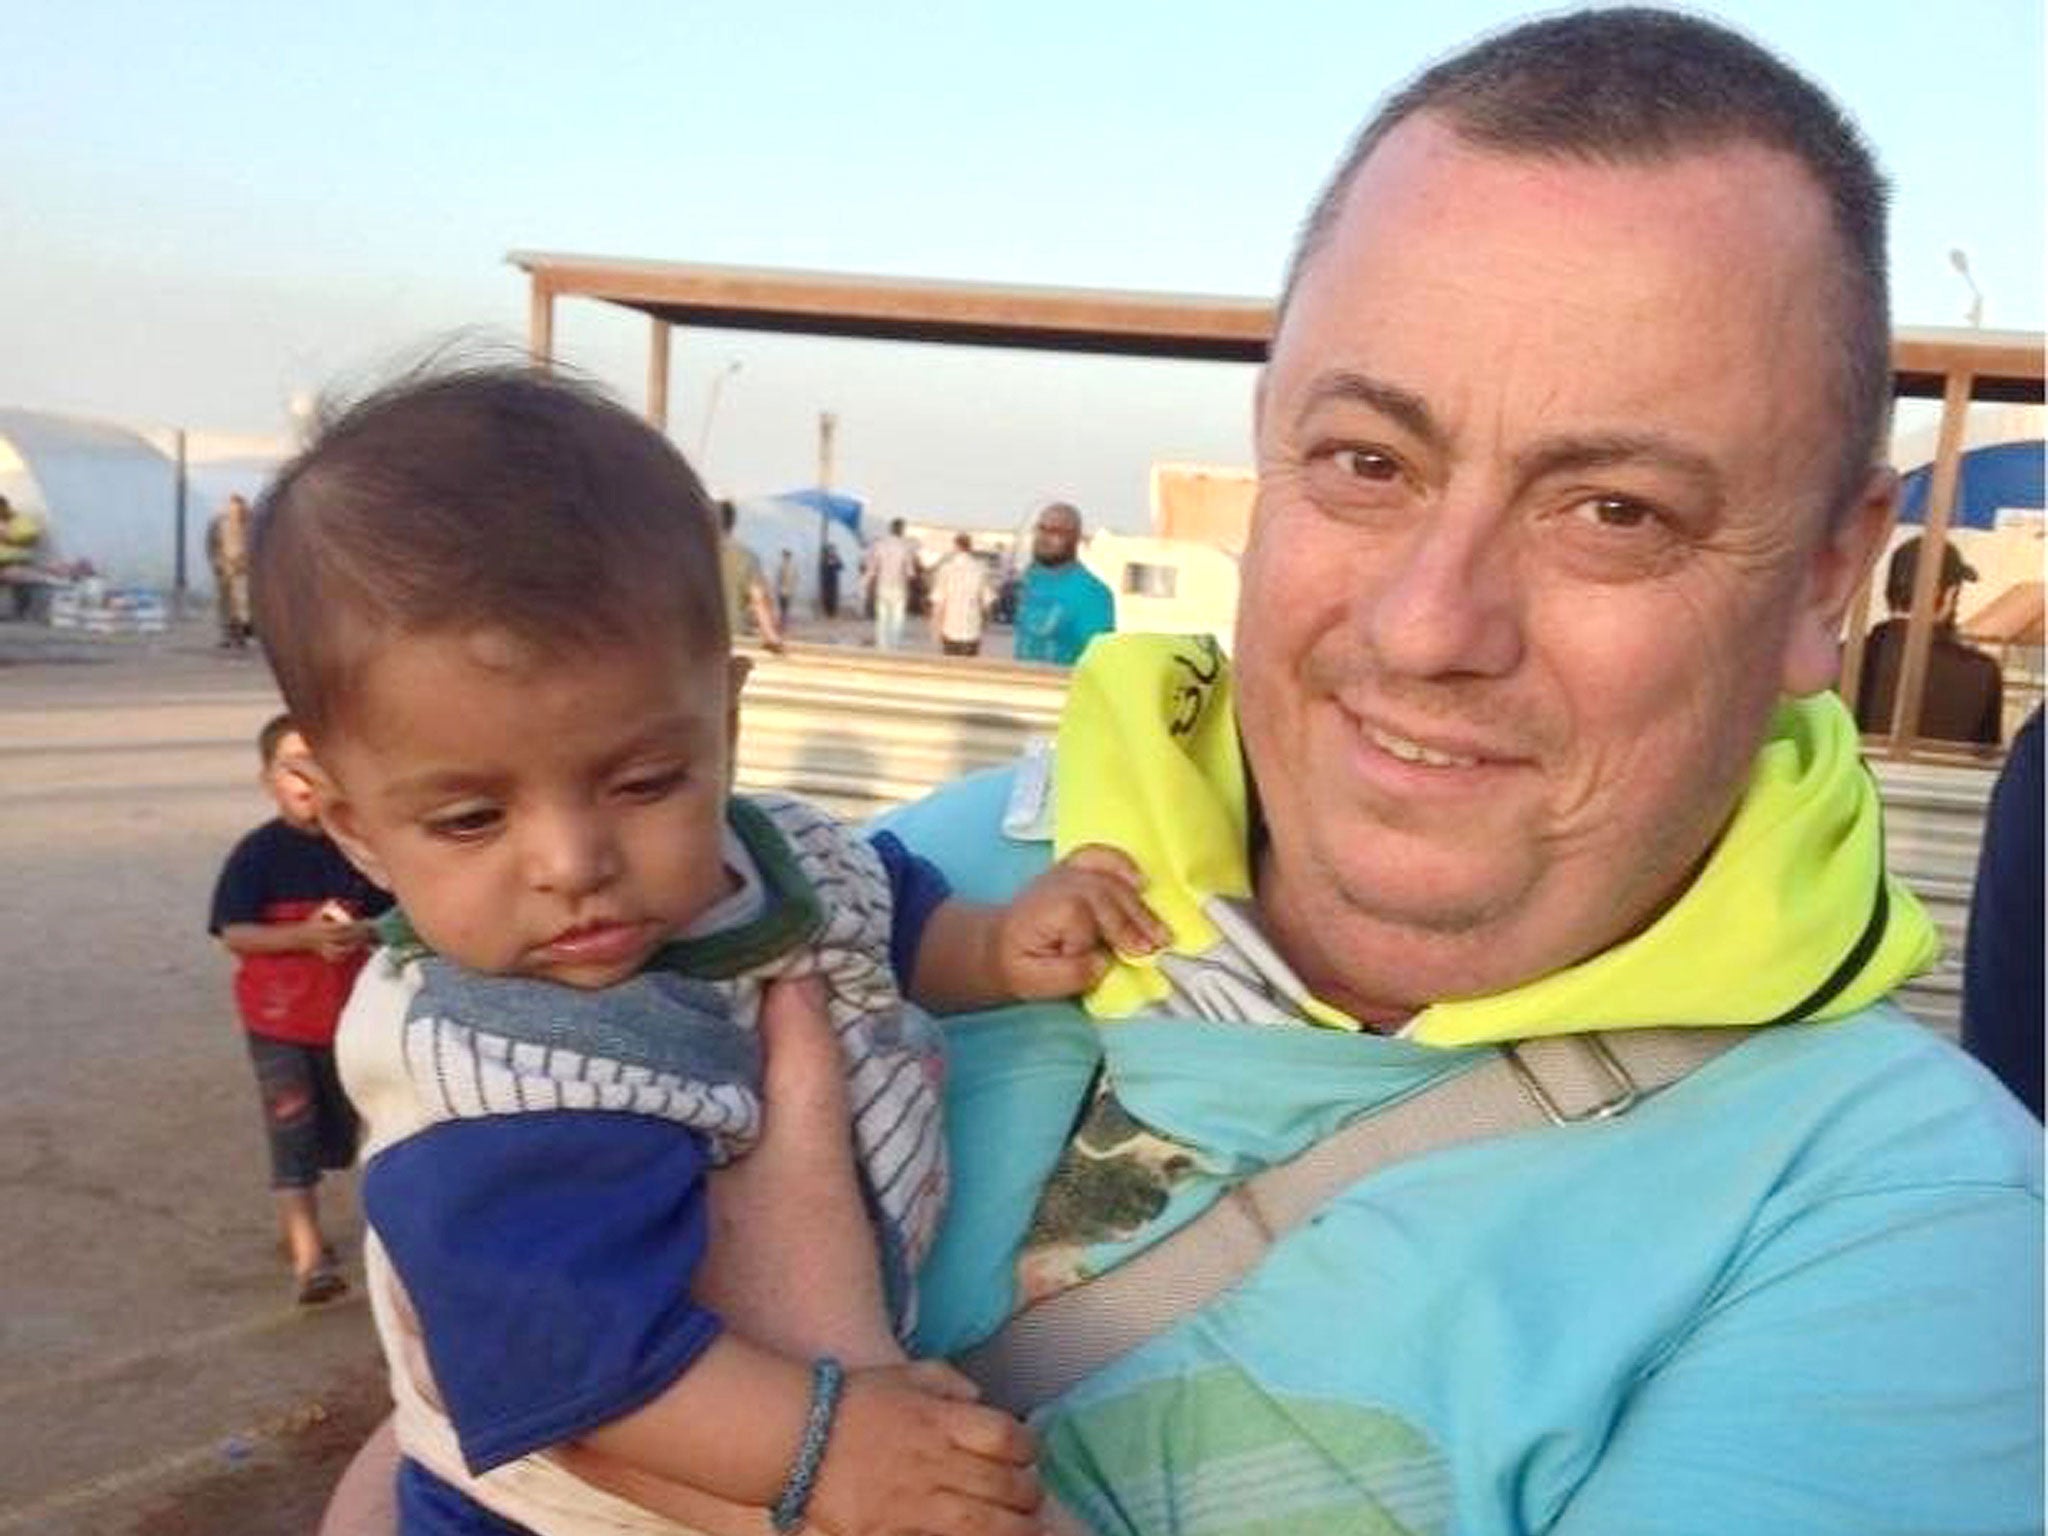 British charity volunteer Alan Henning was among the hostages murdered